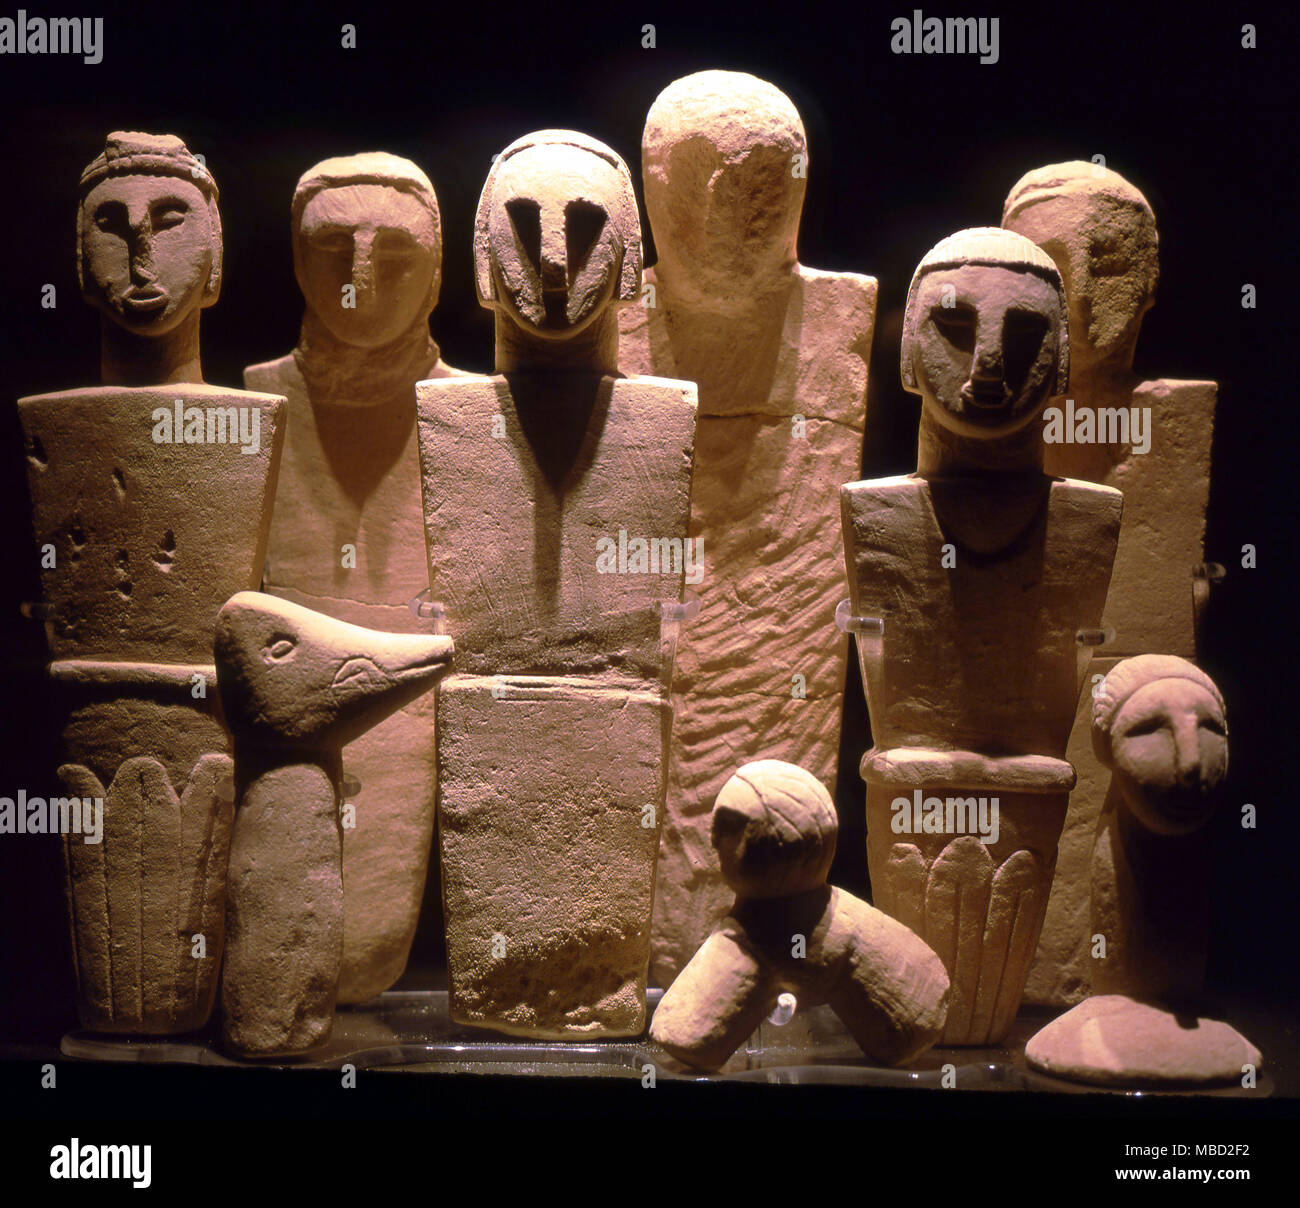 Malta. Figurines, perhaps Shamanic, found in the Xaghra Stone Circle. These are probably the oldest free- standing images in Europe. Stock Photo